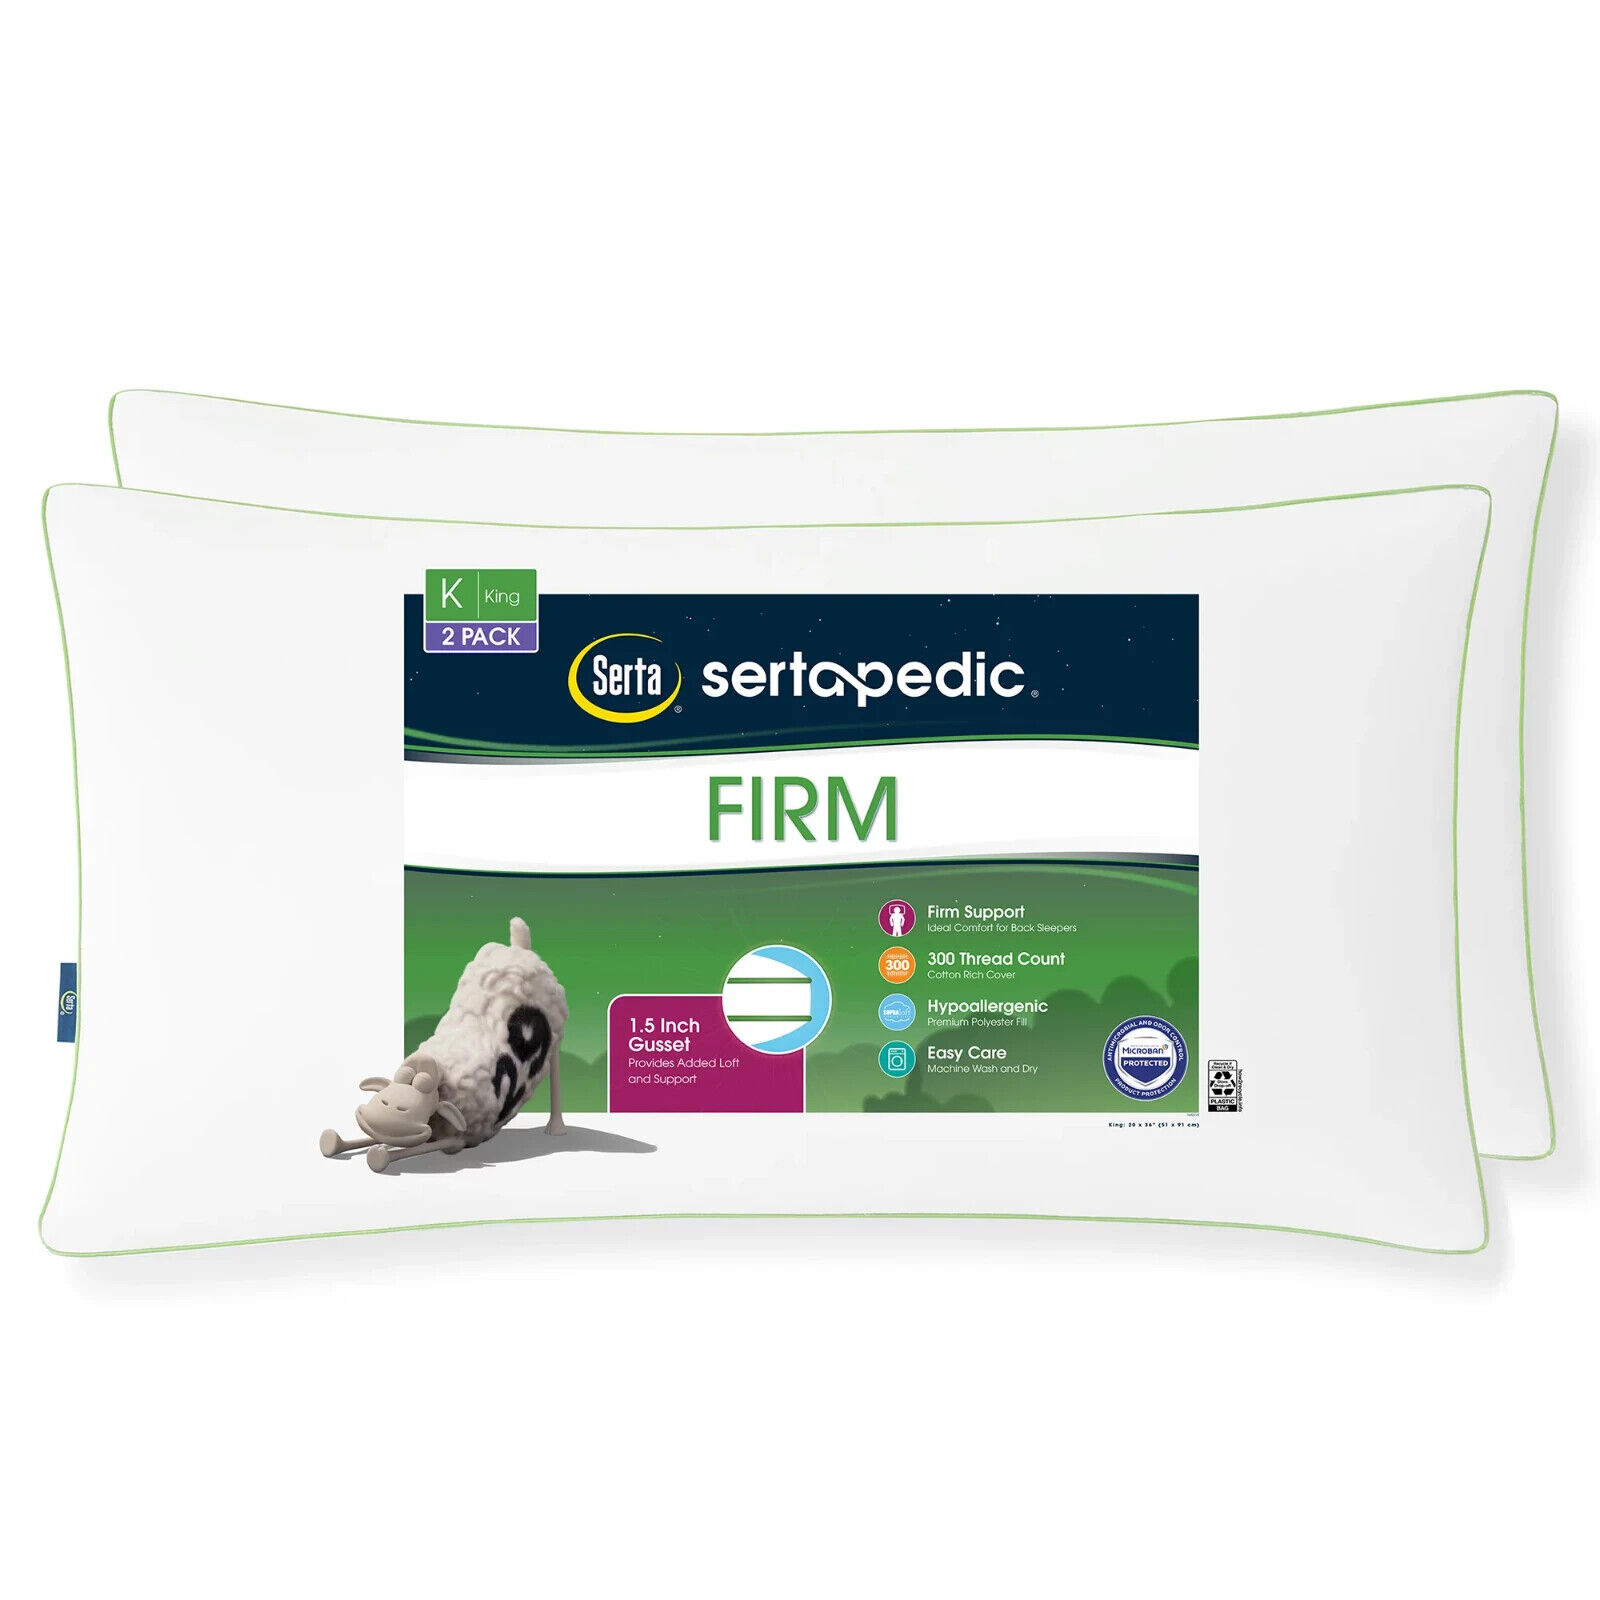 Sertapedic Firm Bed Pillow, King-sized, 2 Pack Free Delivery